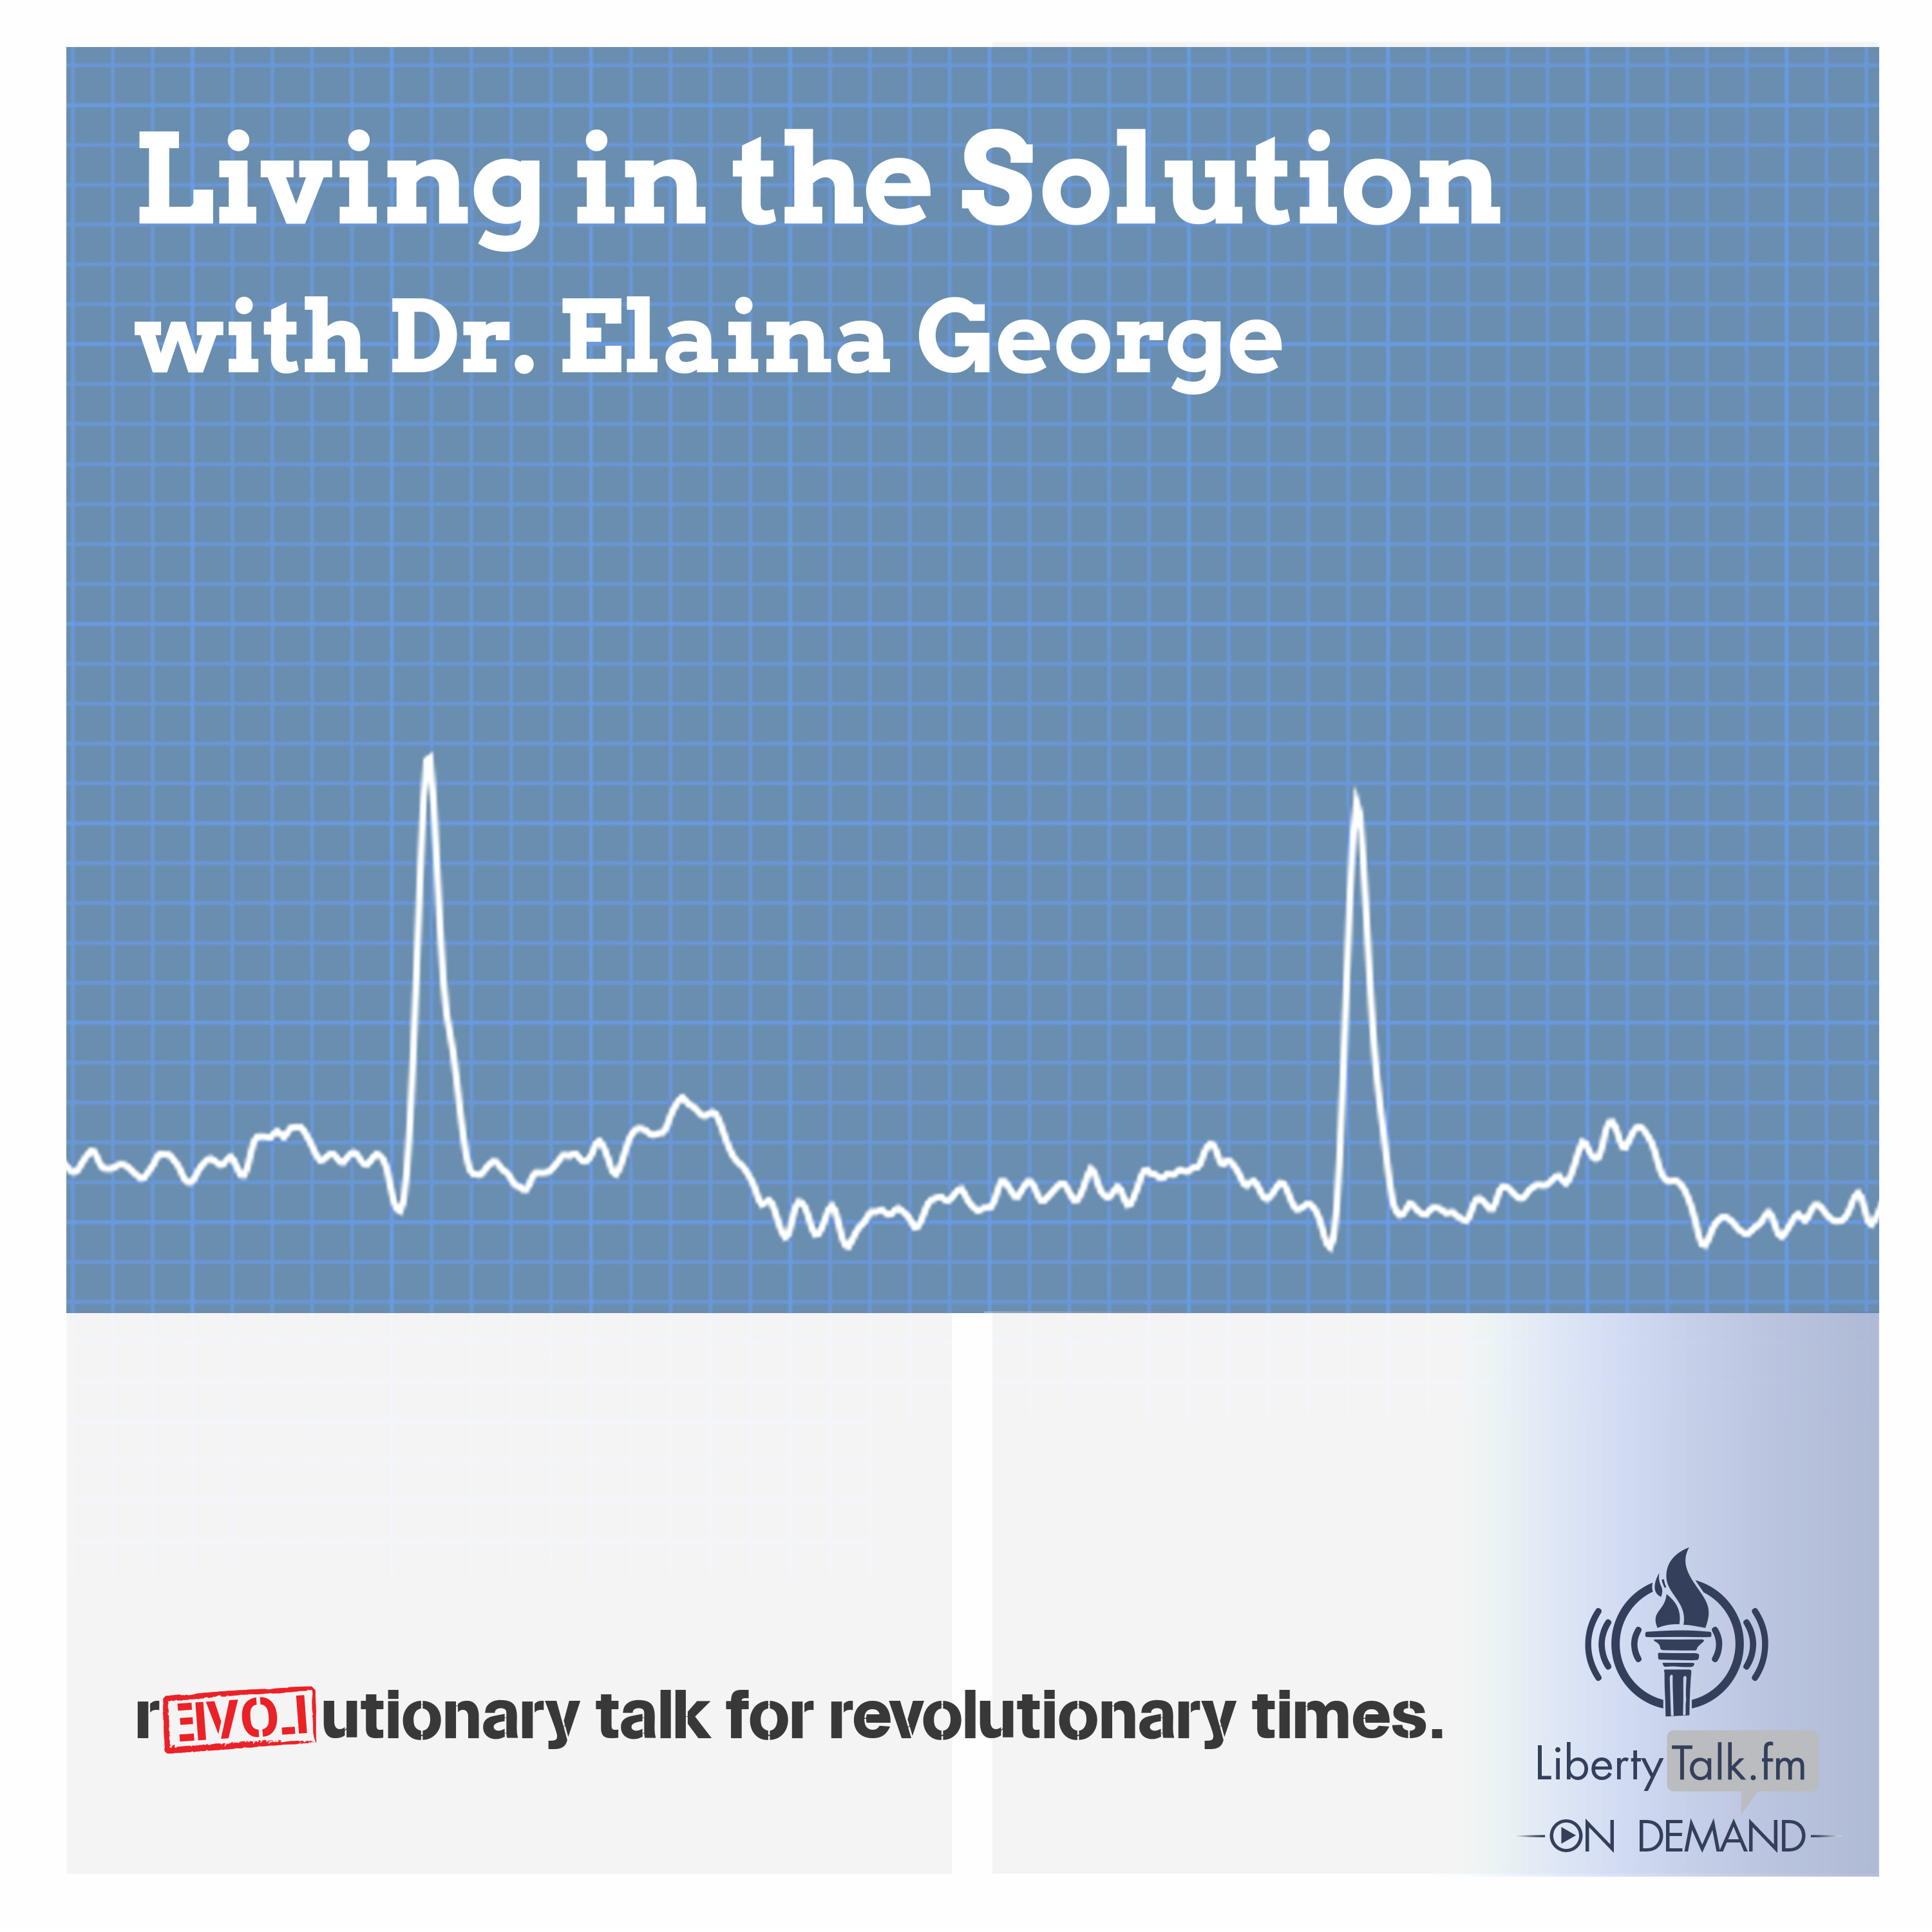 Living in the Solution with Dr. Elaina George